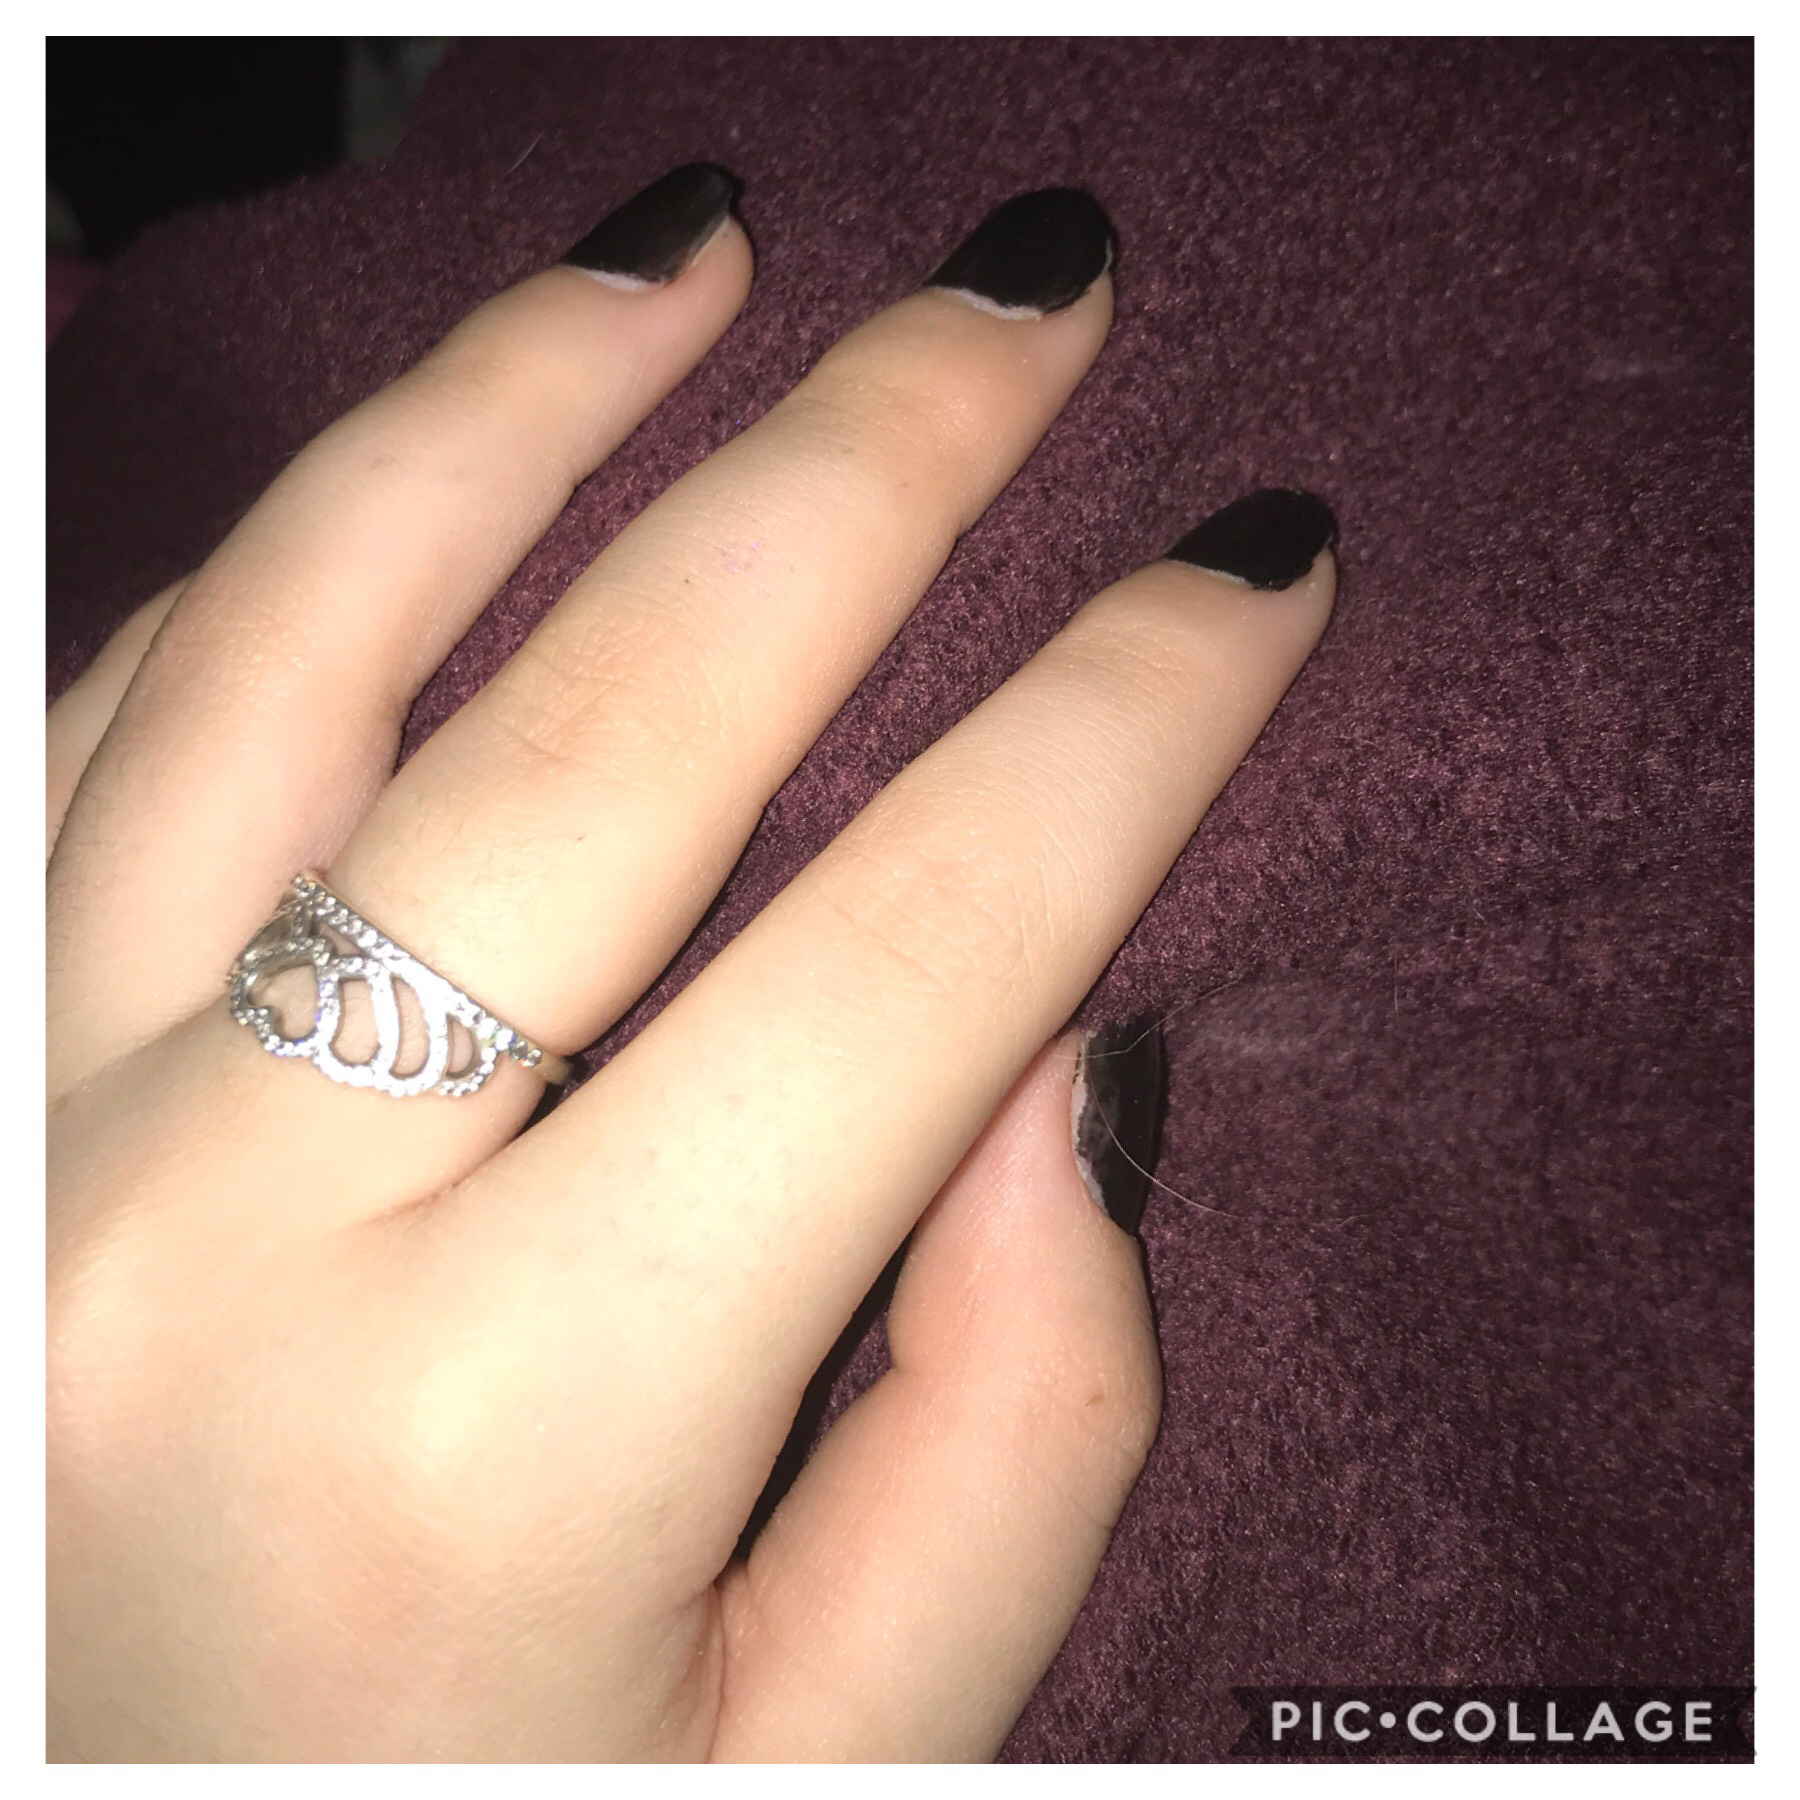 Painted my nails black. Do if I like it though